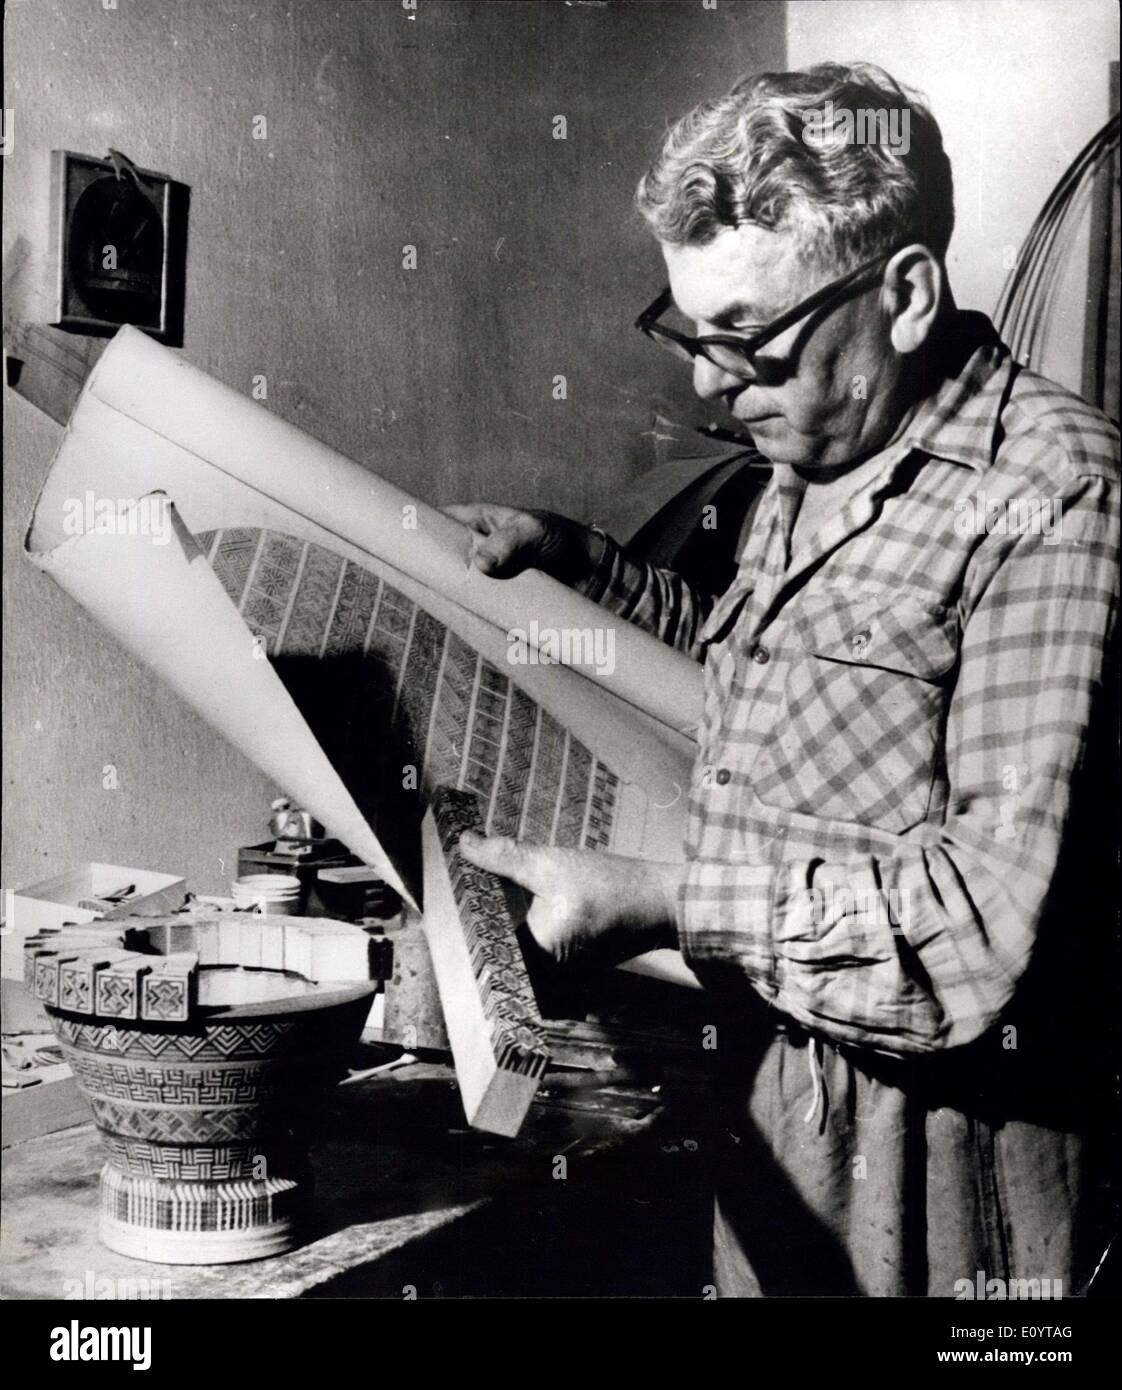 May 11, 1971 - A retired Czech joiner with an unusual hobby: Jan Vavra, a retired joiner from Novy Jicin, North Moravia, who worked in the pattern shop of the Tatra Automobile Works at Koprivince for many years, has another interesting hobby. His love of wood and his desire to create something individual, was the origin of his present skill and craftsmanship. From different species of wood he makes things such as vases, dishes, candlesticks, bracelets, writing sets ans so on Stock Photo